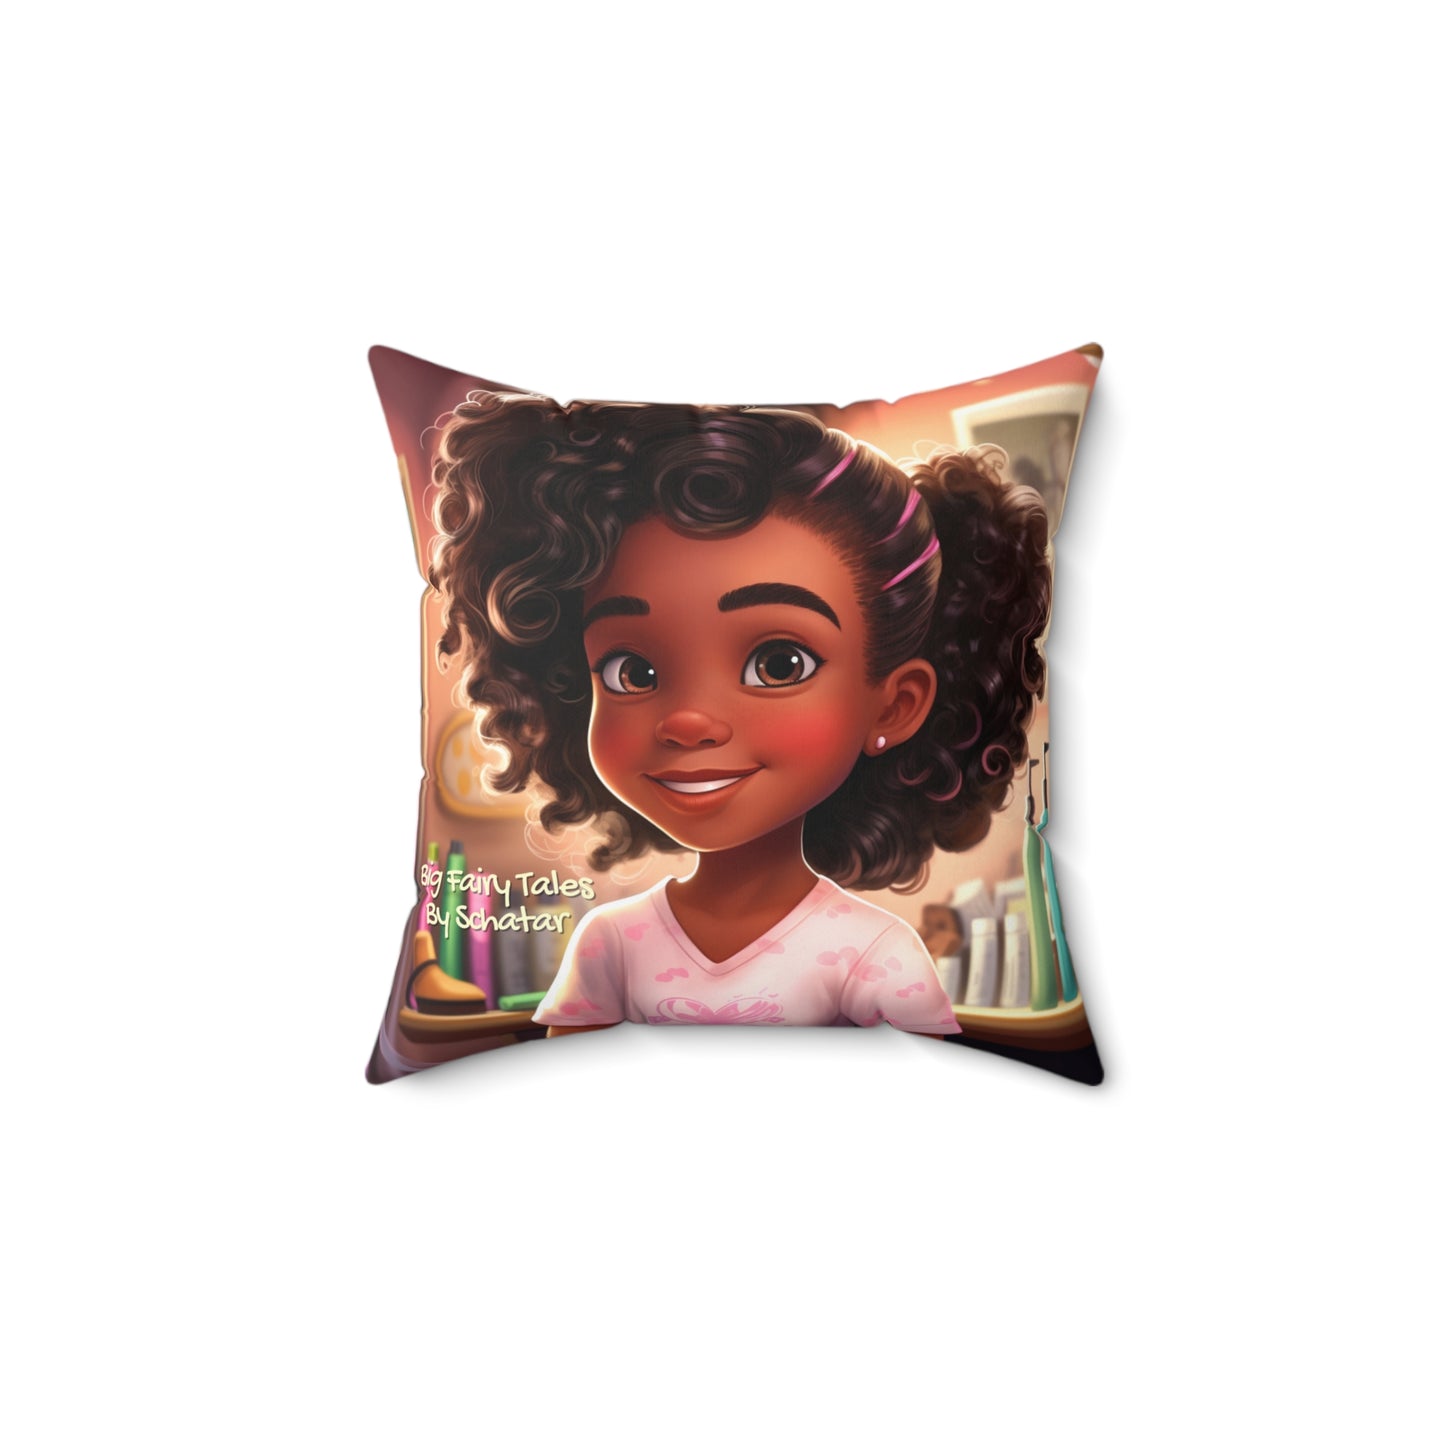 Beauty Shop Owner - Big Little Professionals Plush Pillow 18 From Big Fairy Tales By Schatar